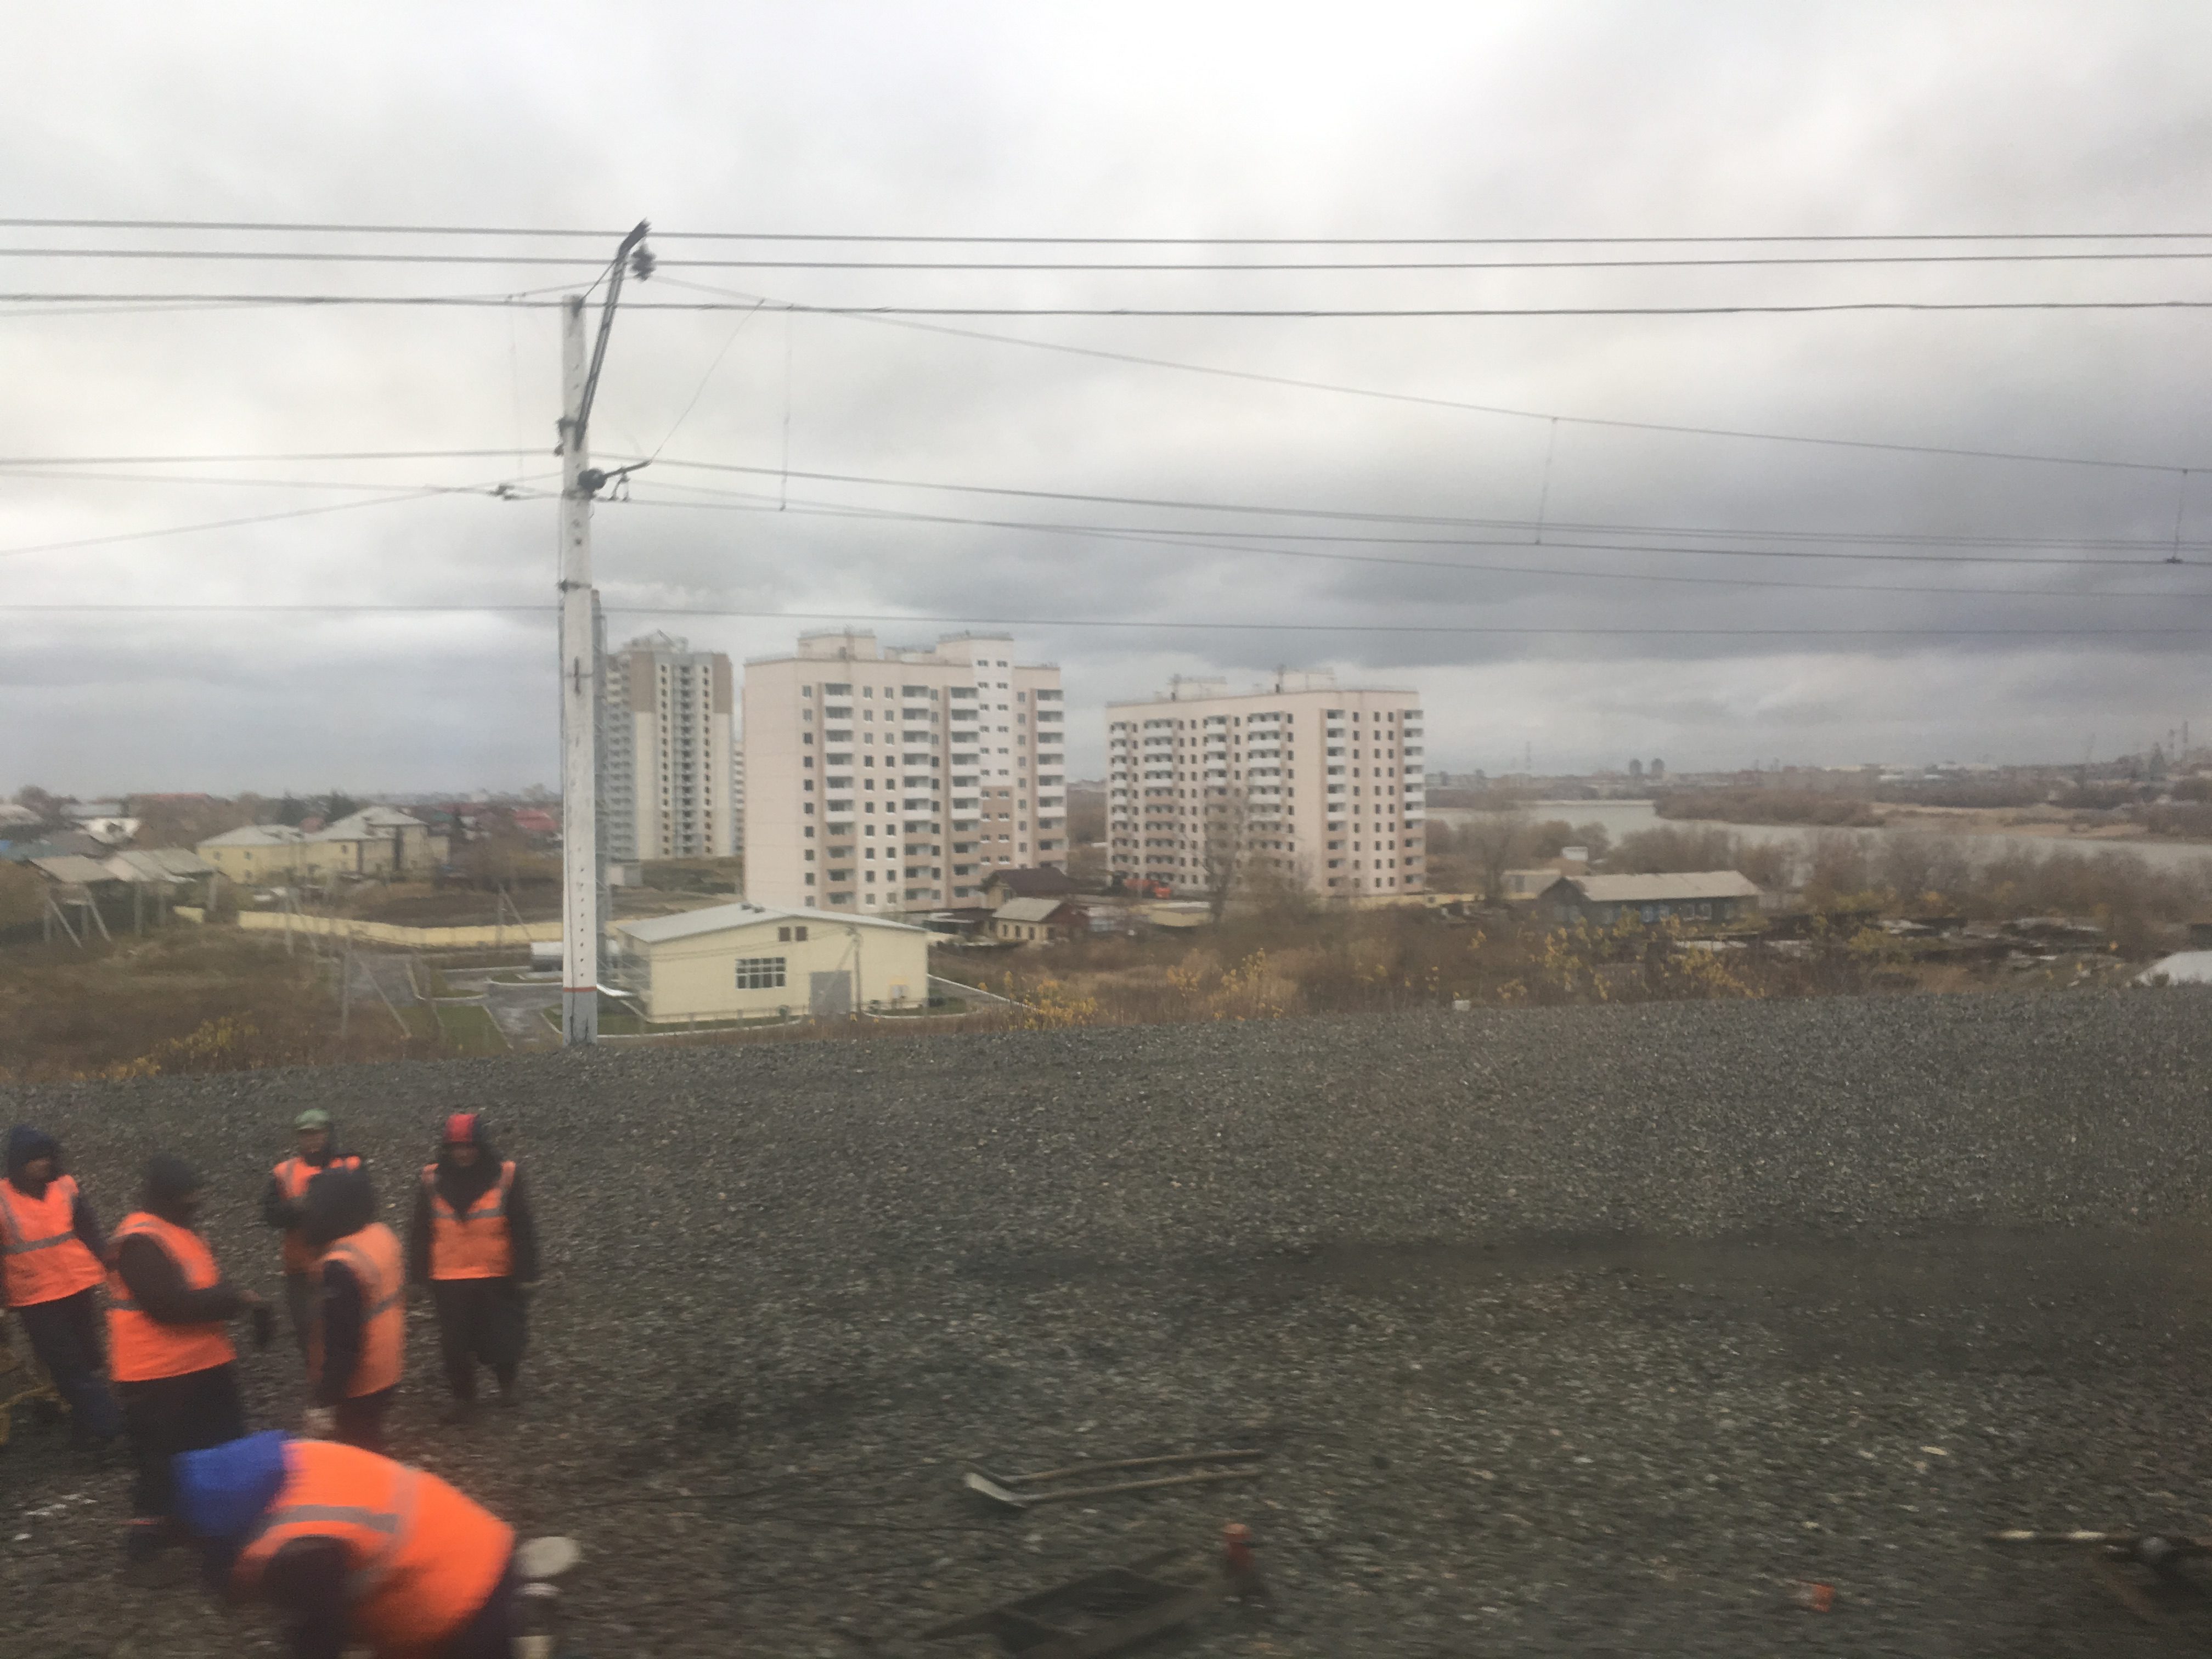 The workers of Omsk maintain the tracks